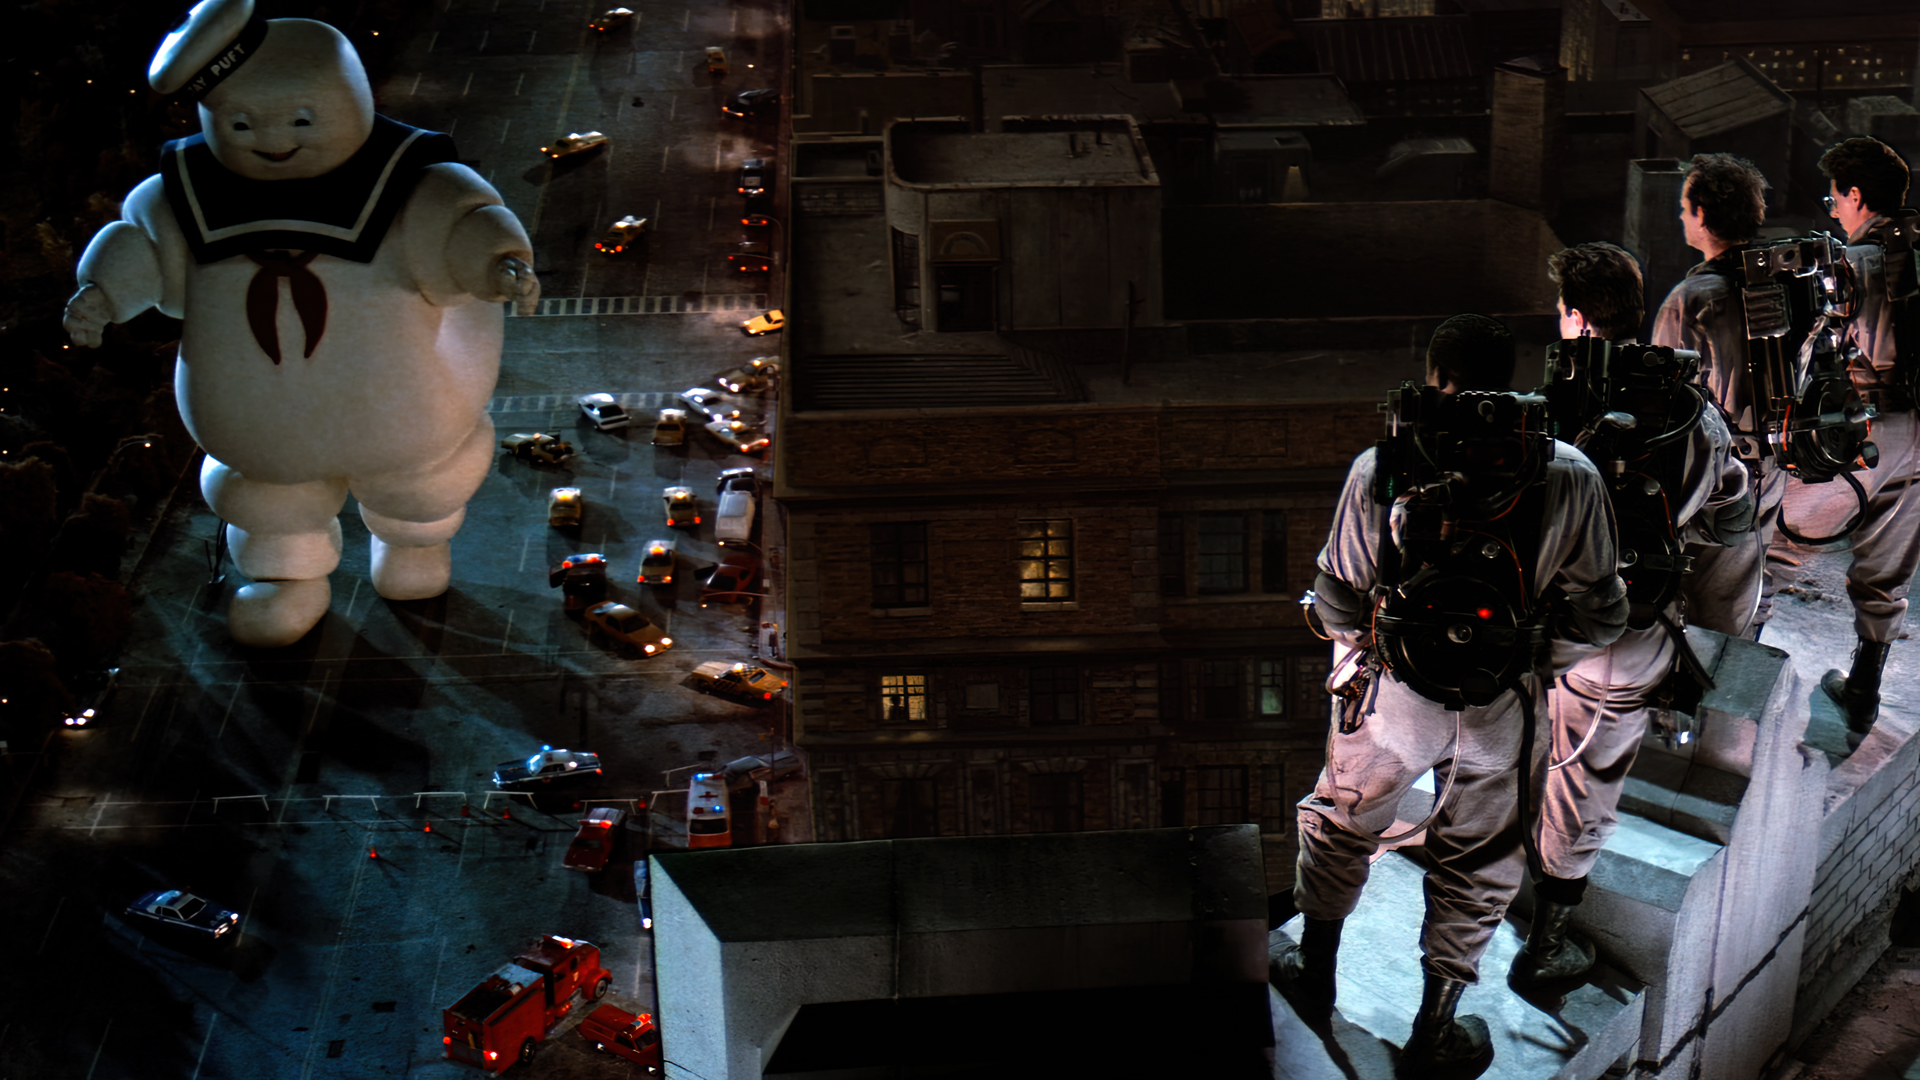 People 1920x1080 Ghostbusters movies film stills New York City building car Stay Puft Marshmallow Man street rooftops